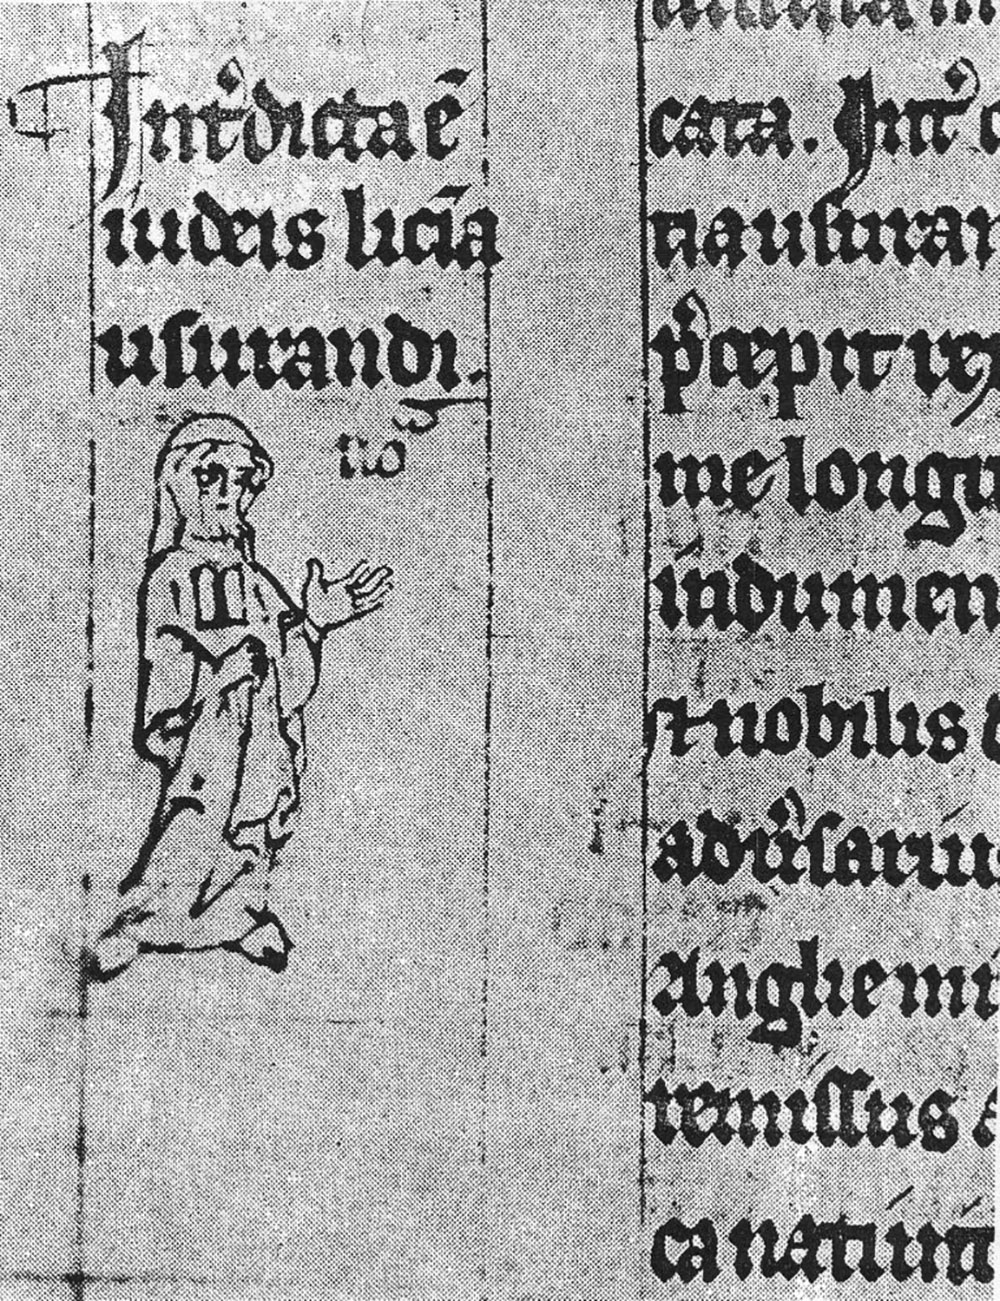 A scan of a tablet of the Old Testament showing a drawing of a person wearing a badge on their chest.